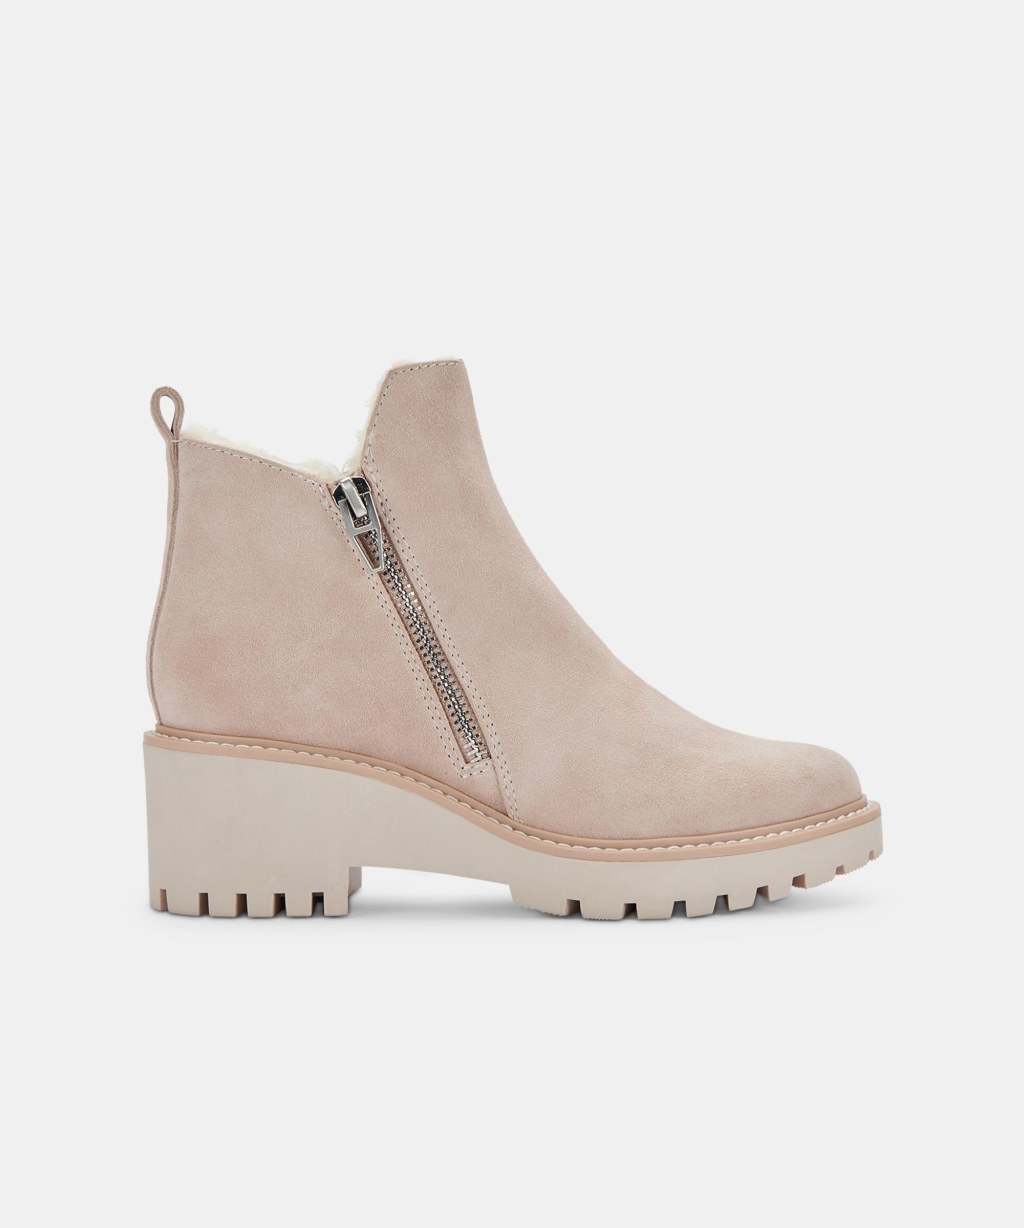 dolce vita hollyn - HOLLYN BOOTIES NATURAL SUEDE